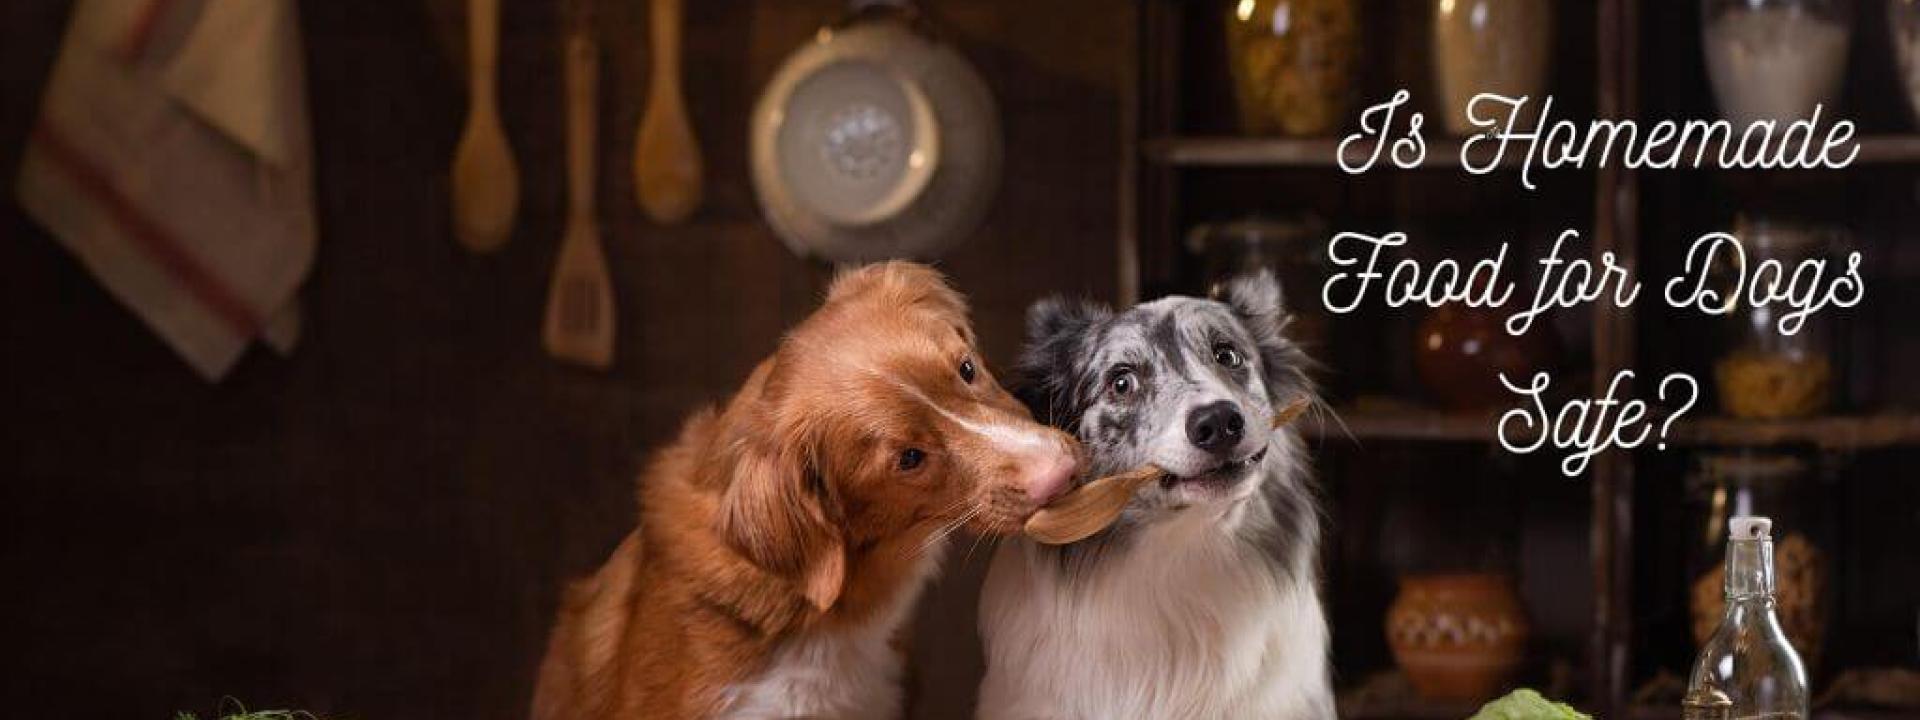 Is Homemade Food for Dogs Safe?